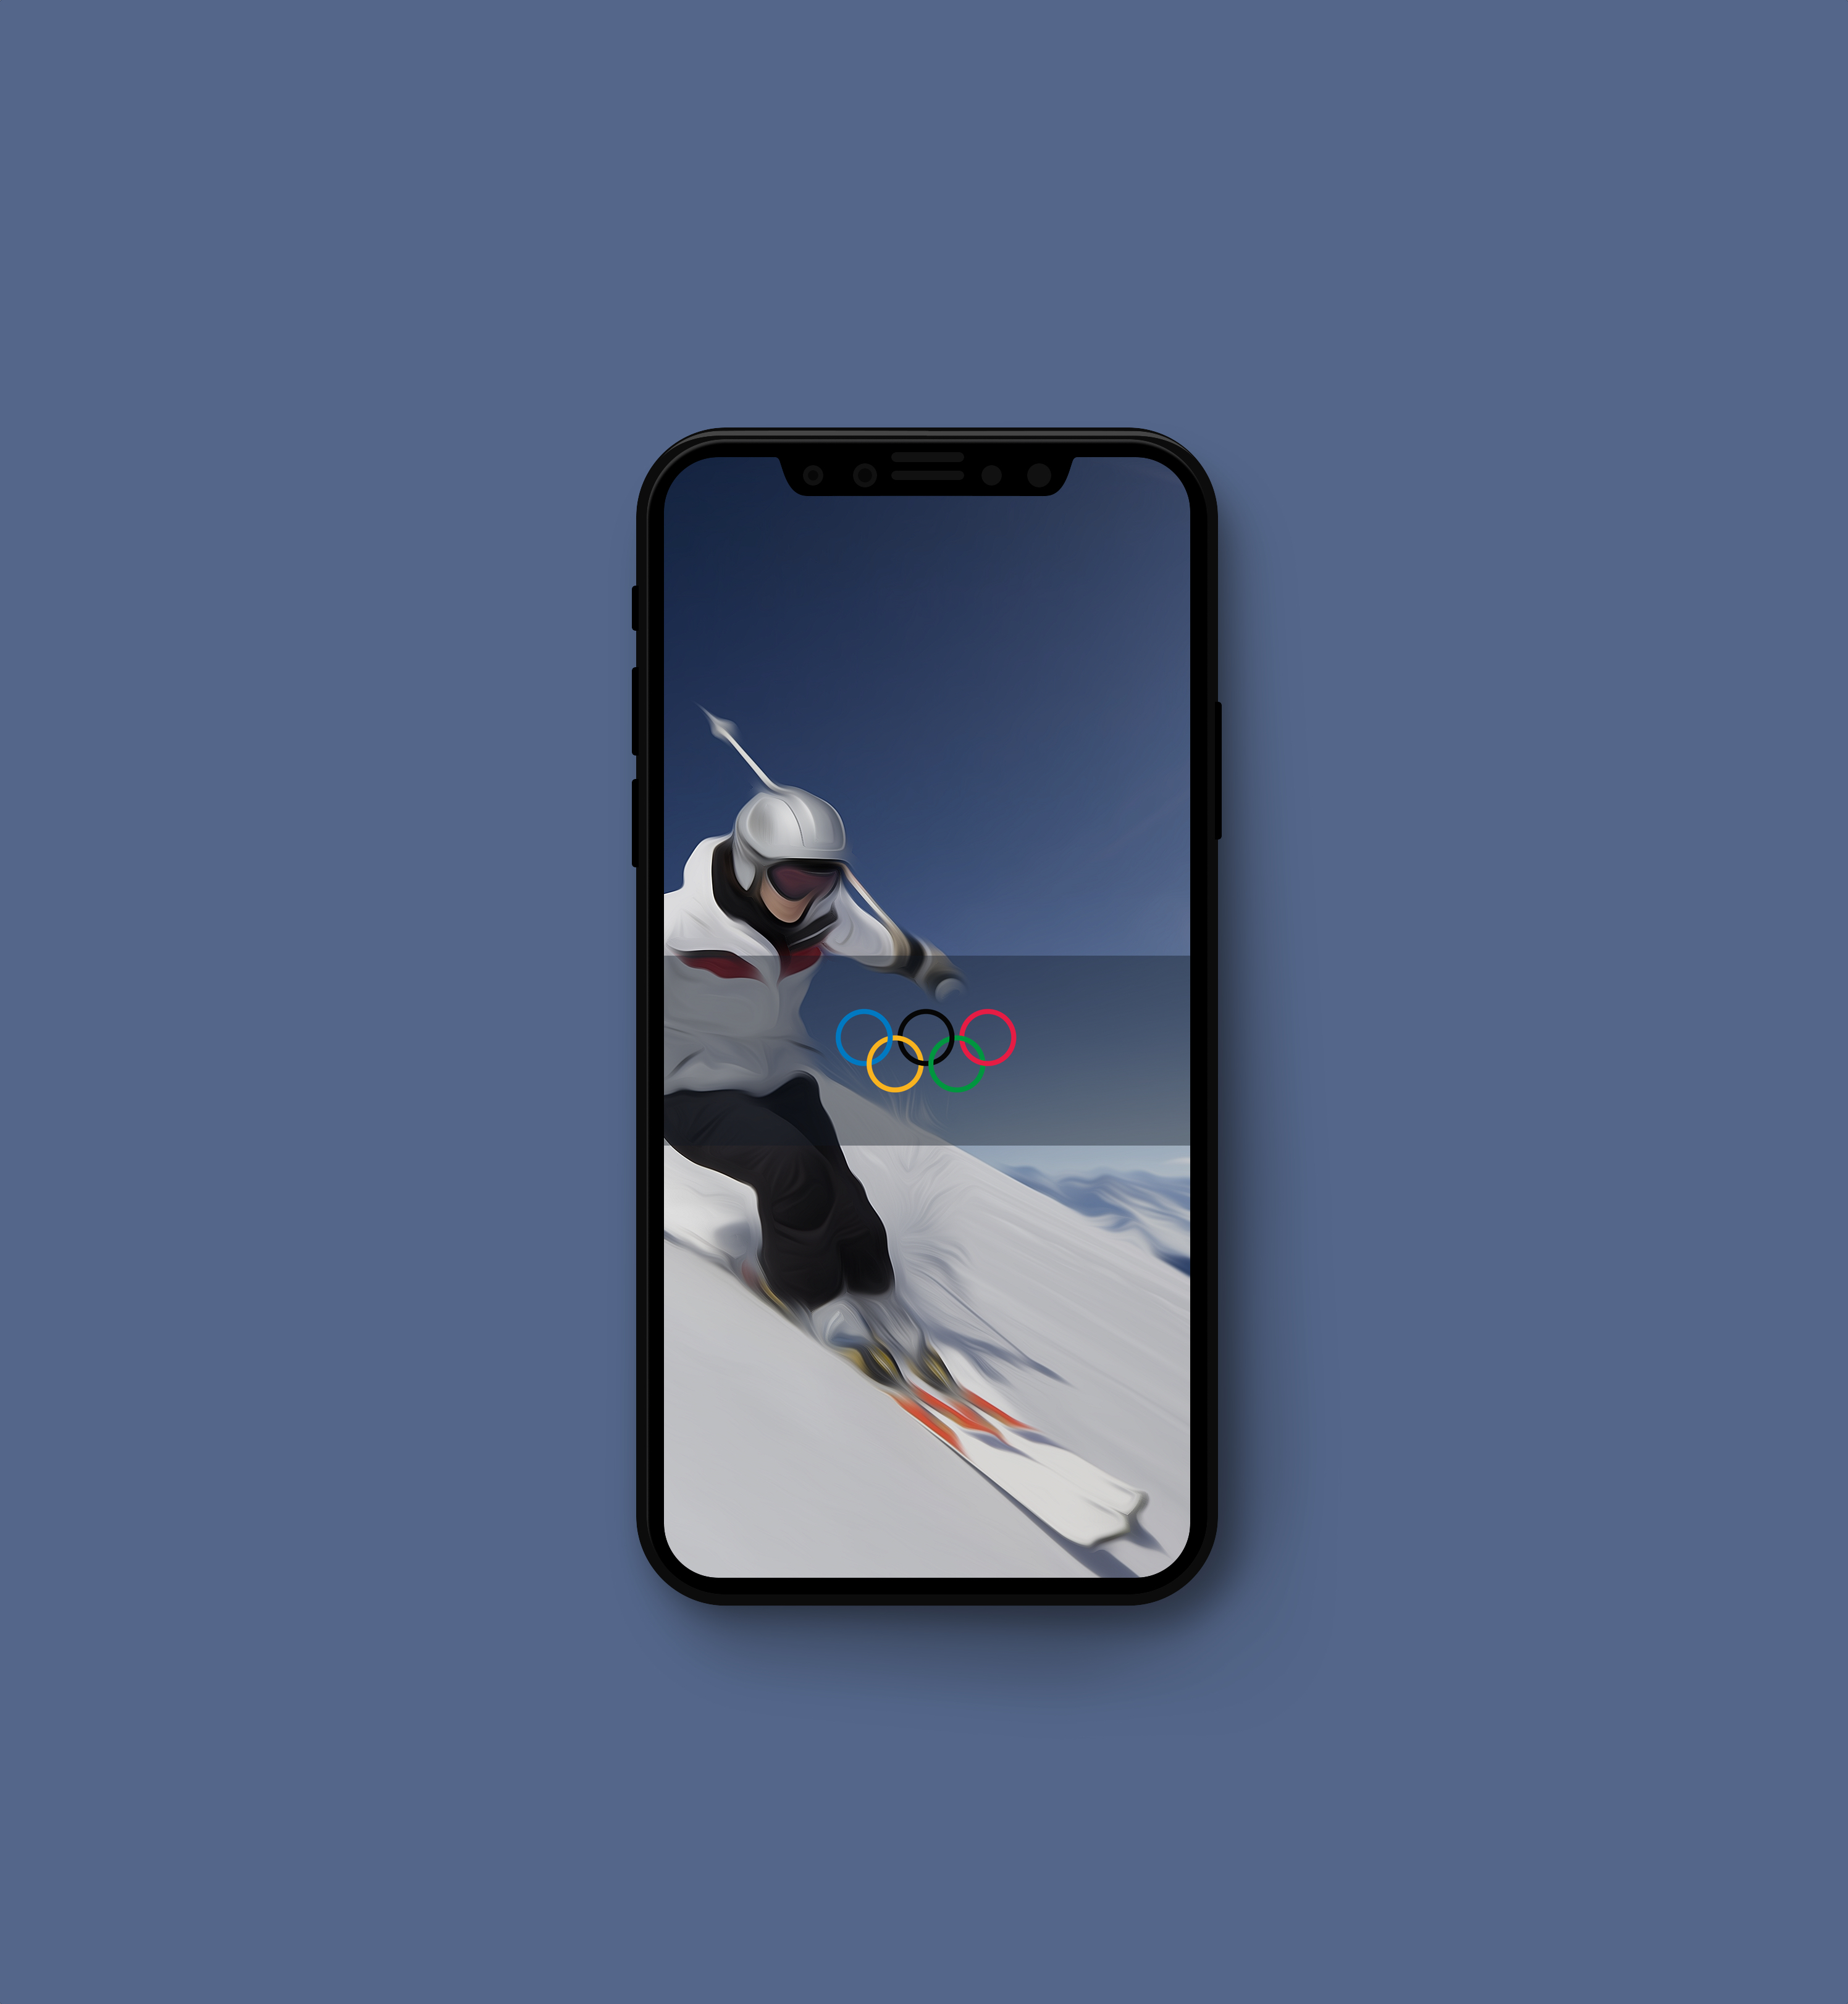 Winter Olympics wallpaper for iphone